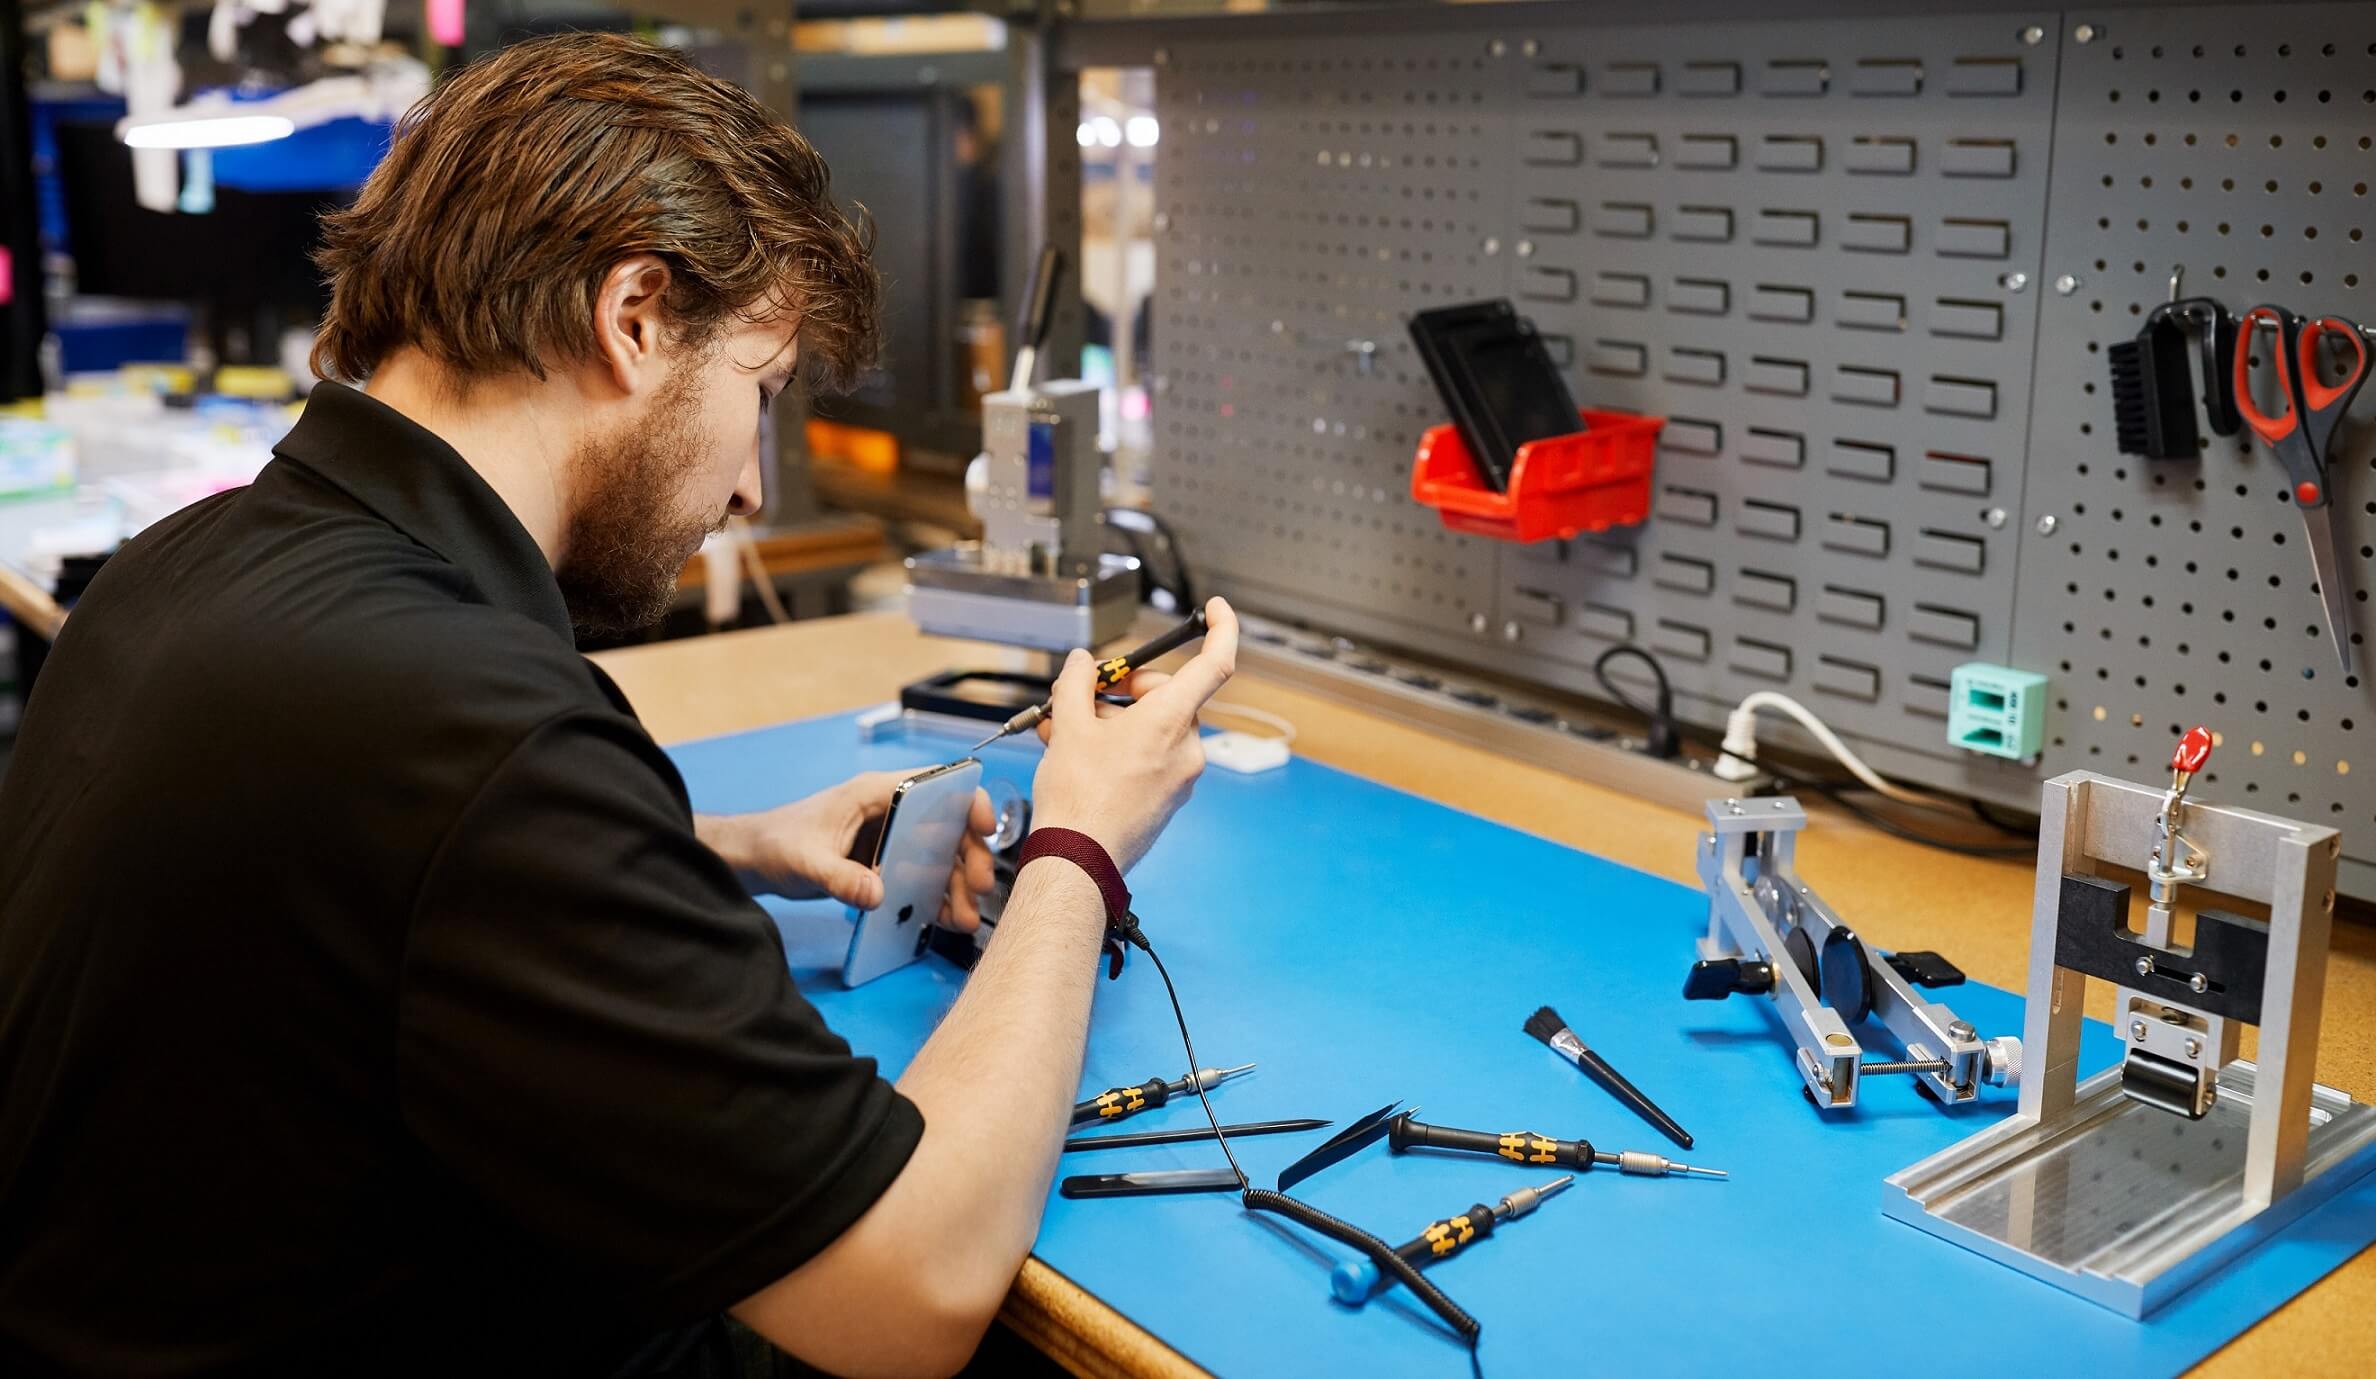 Apple will expand access to genuine iPhone parts for independent repair shops in the US